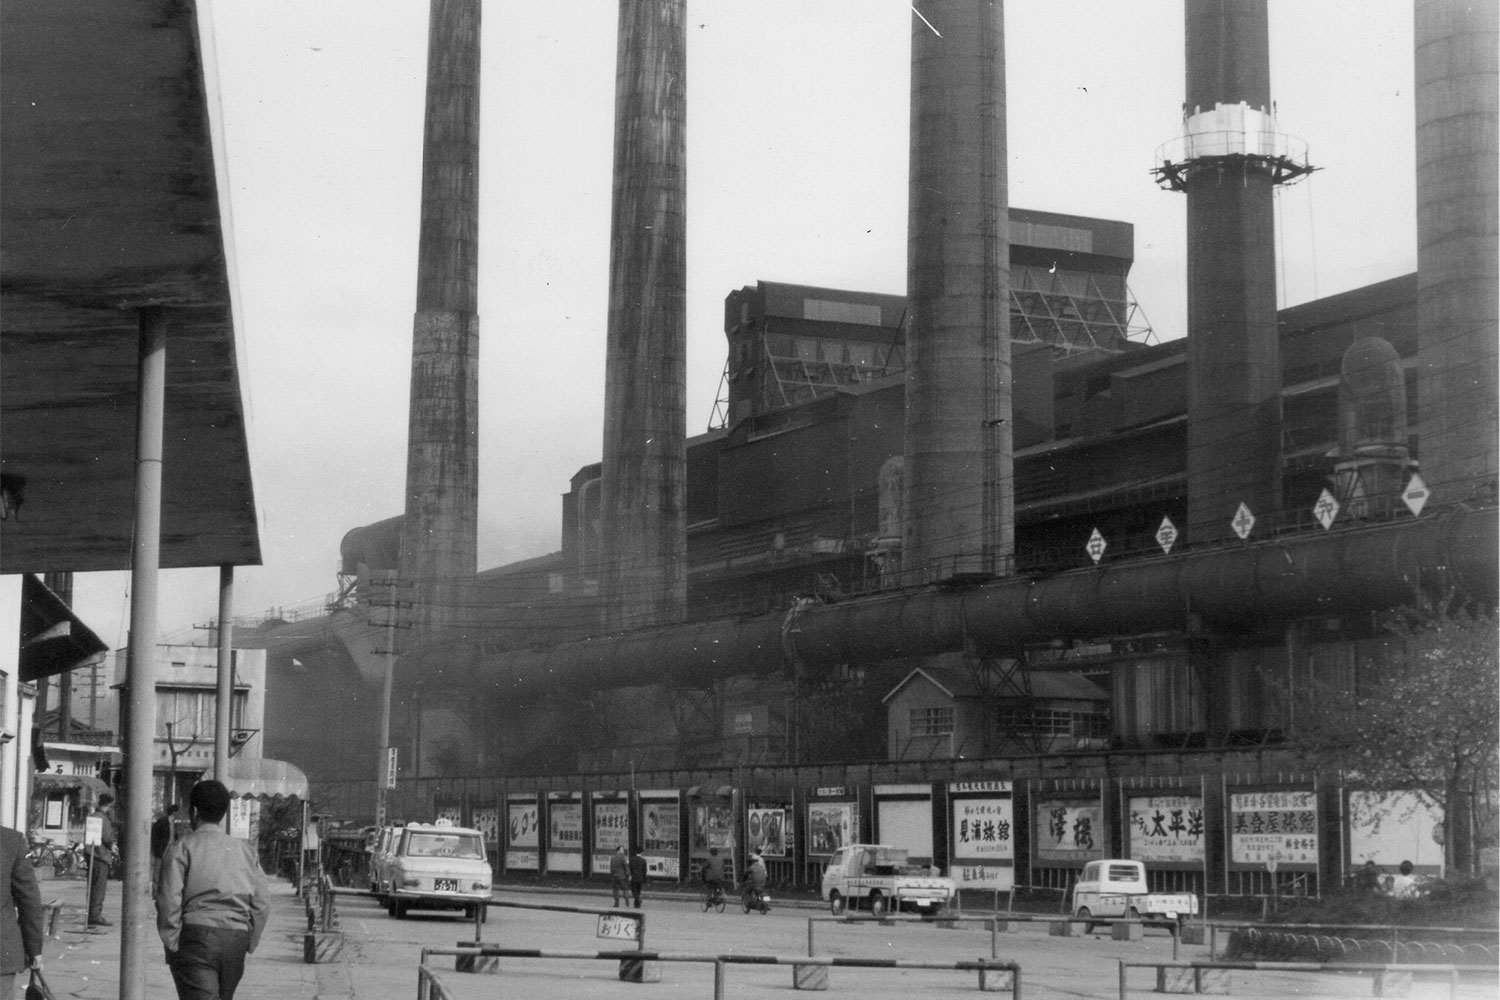 Kamaishi Steelworks in front of Kamaishi Station in the 1960s.